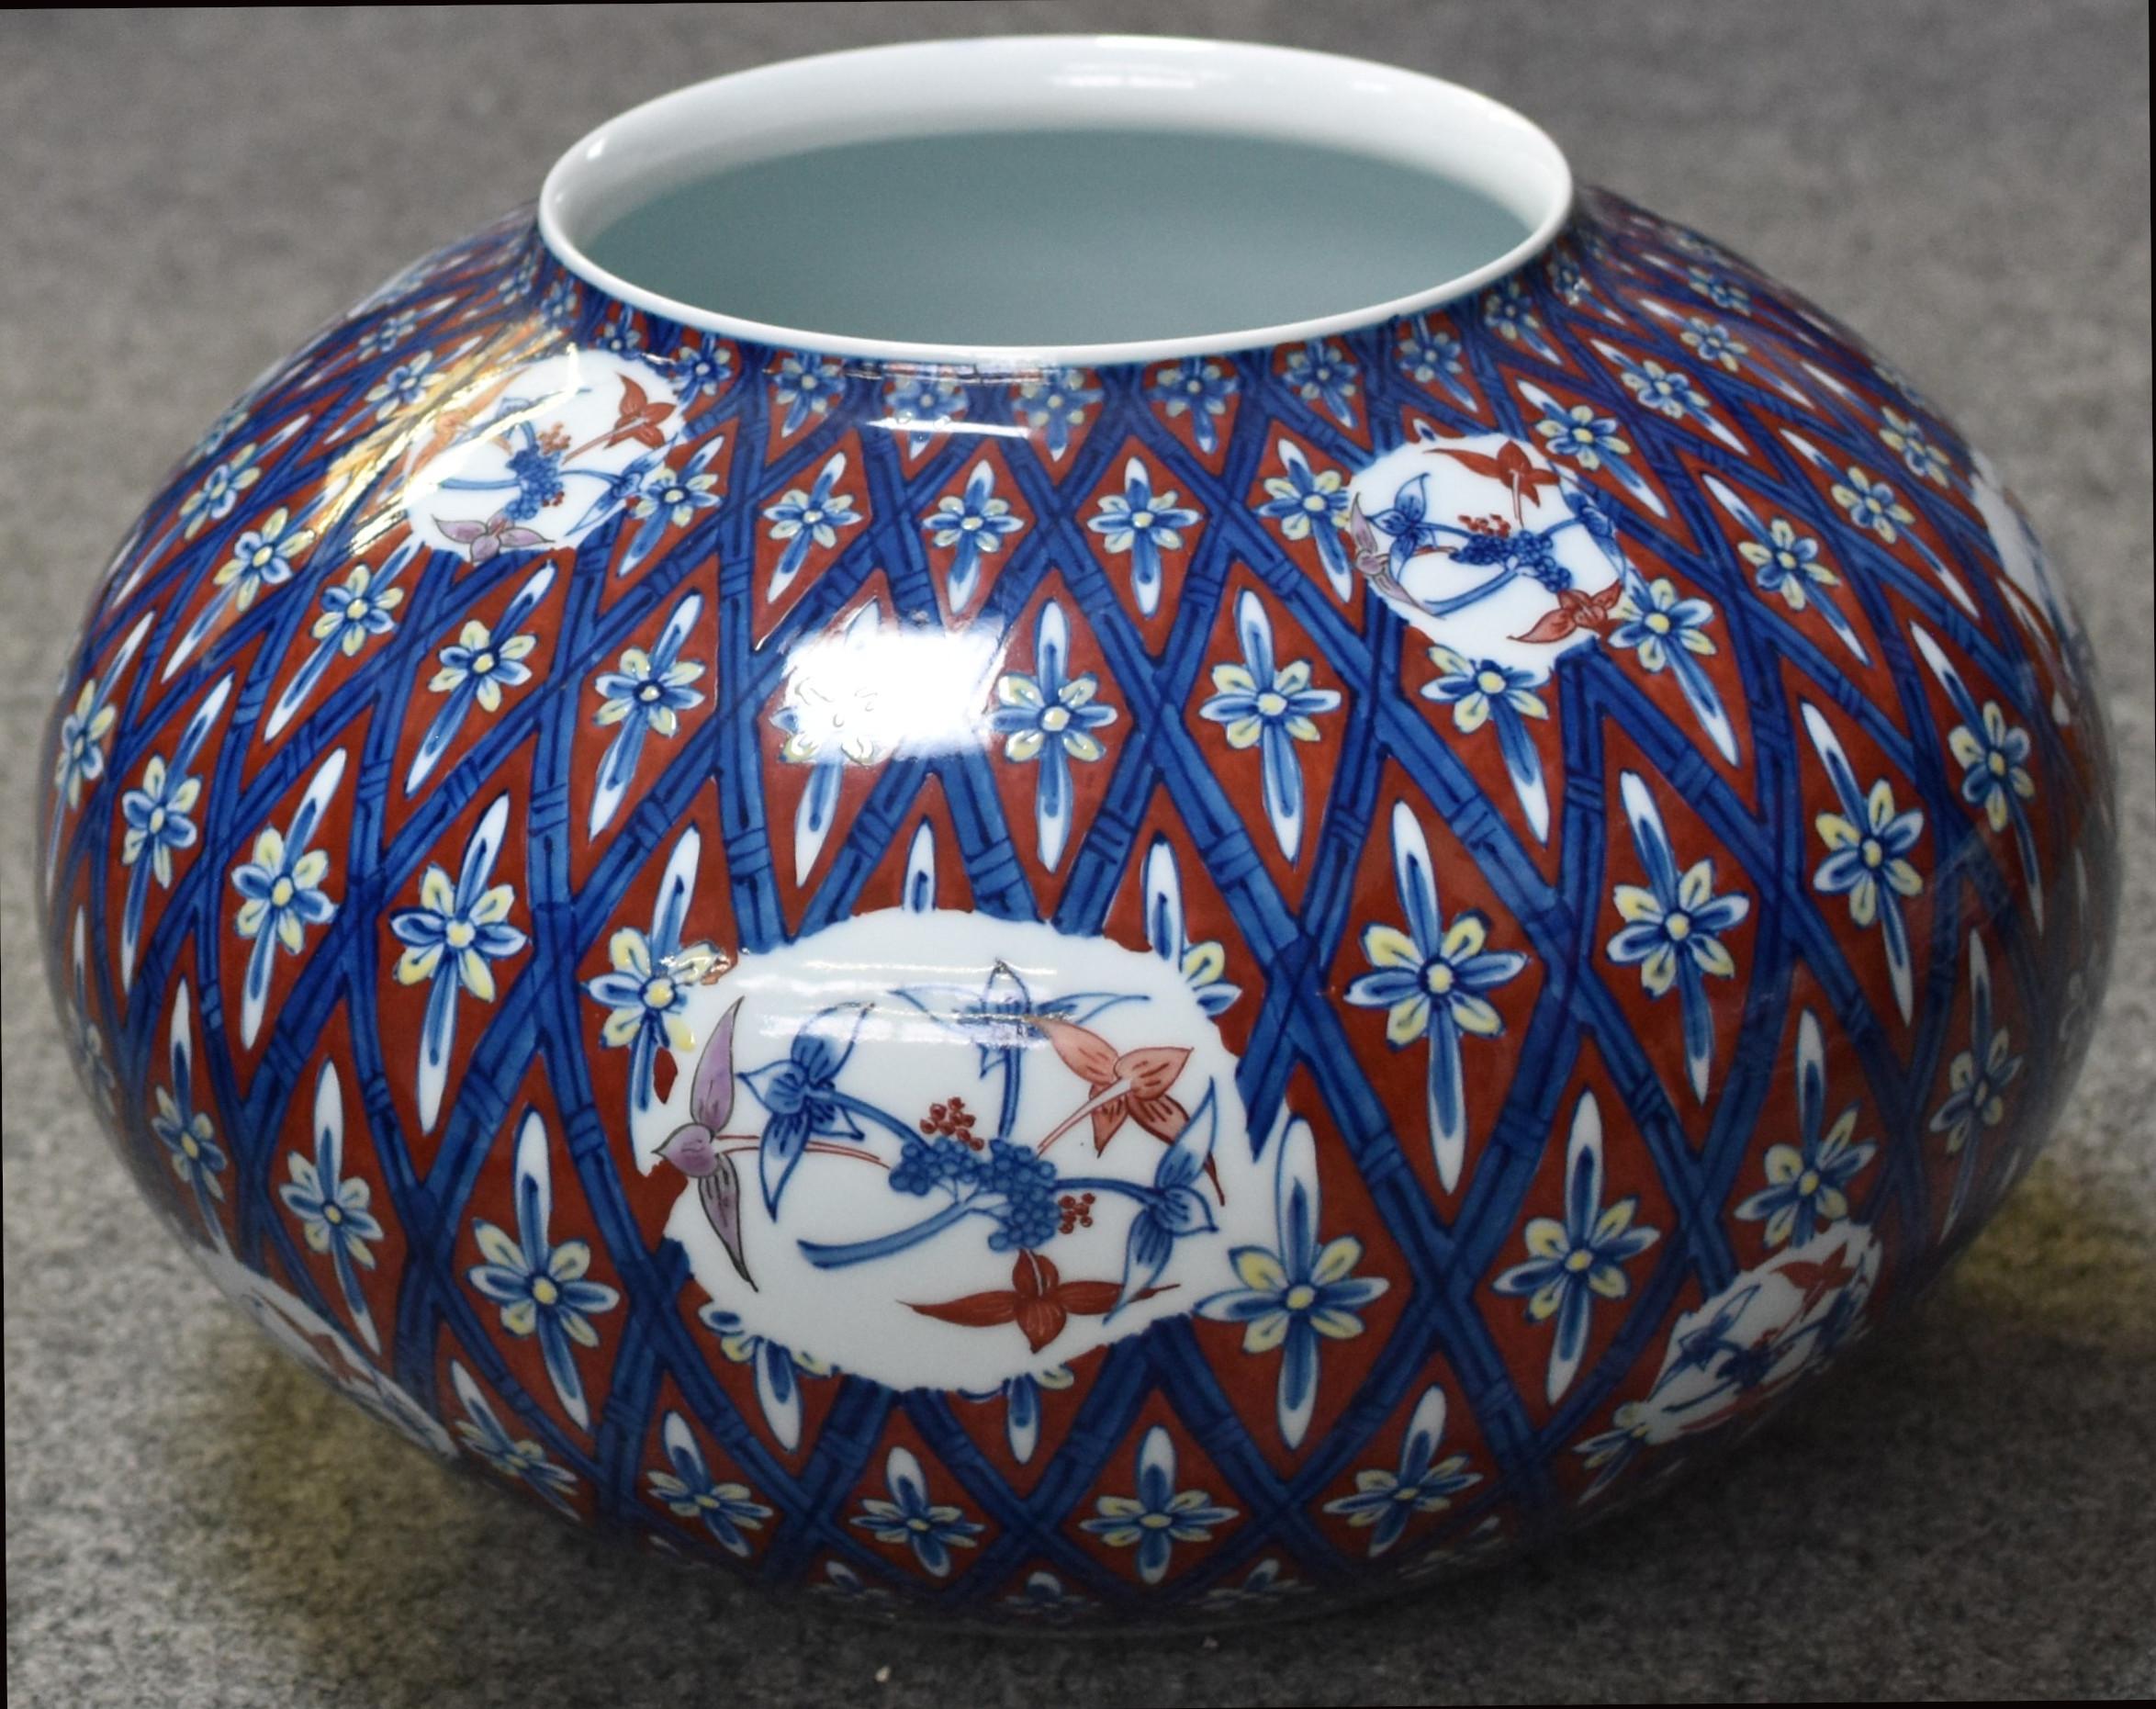 Extraordinary Japanese Contemporary museum quality decorative porcelain vase in a striking shape, intricately hand painted in blue, white and red to create a signature geometric pattern with blue lines showcasing bamboo branches. A masterpiece by a